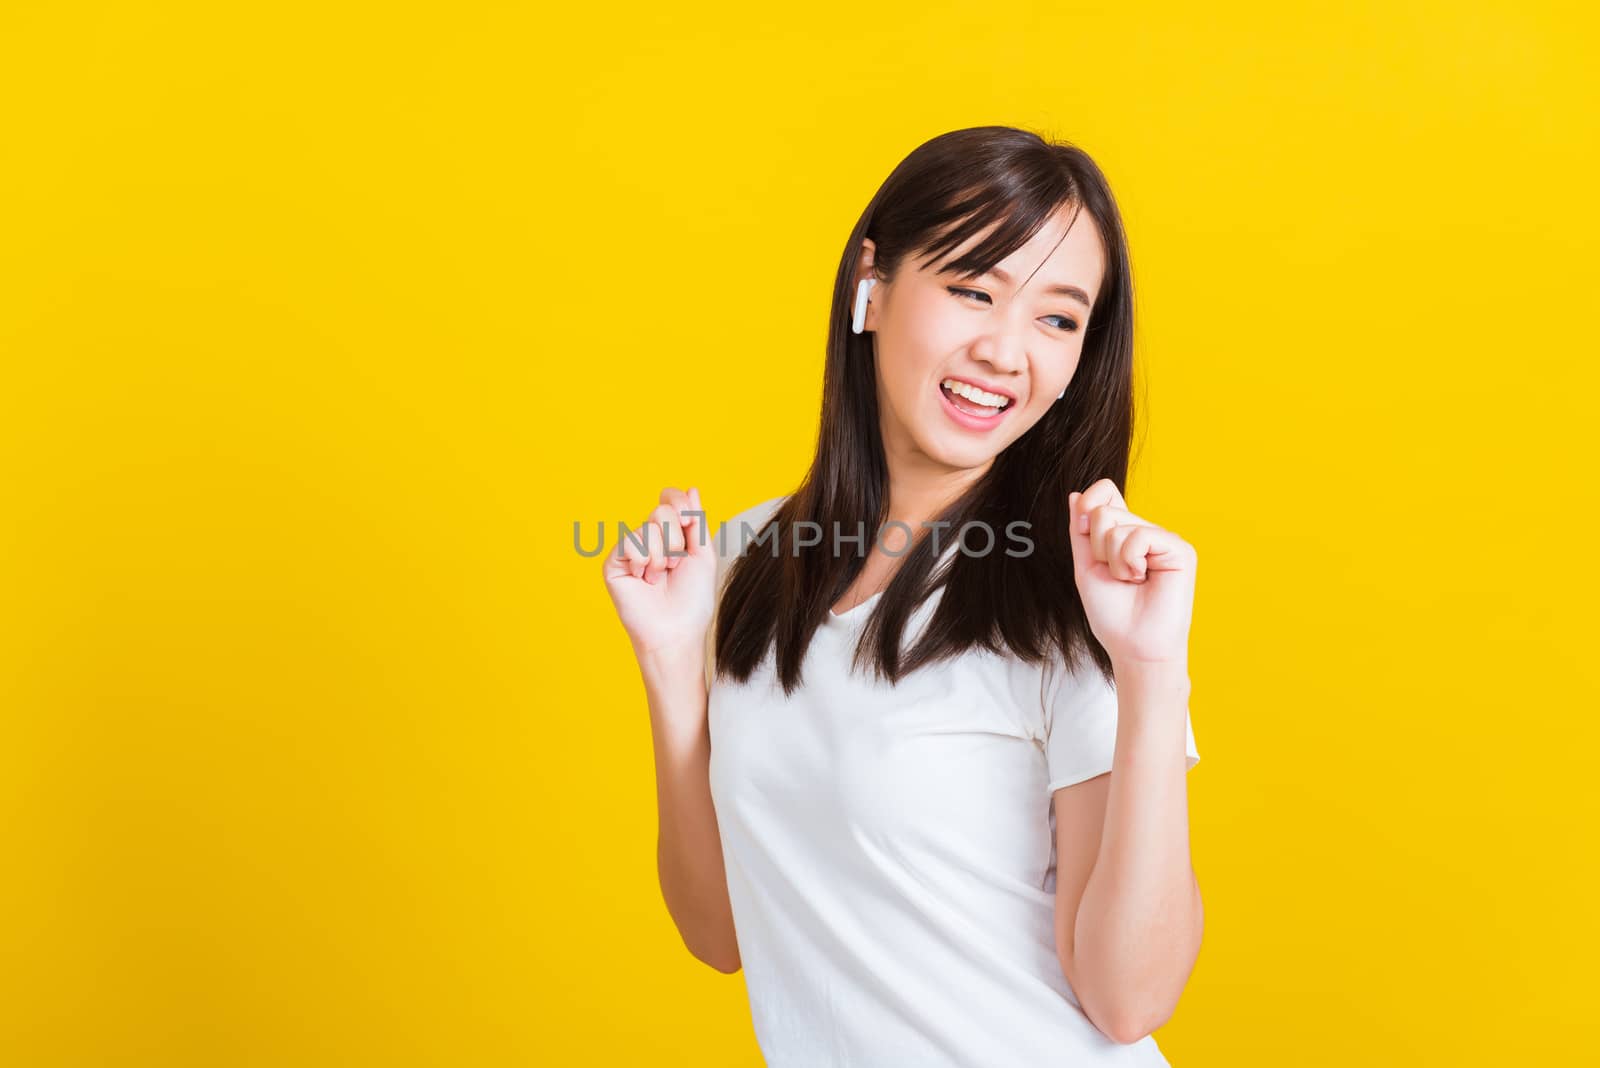 Portrait Asian of a happy beautiful young woman wear wireless earphone listening to music from smartphone having fun and dancing to sounds of favorite music studio shot isolated on yellow background